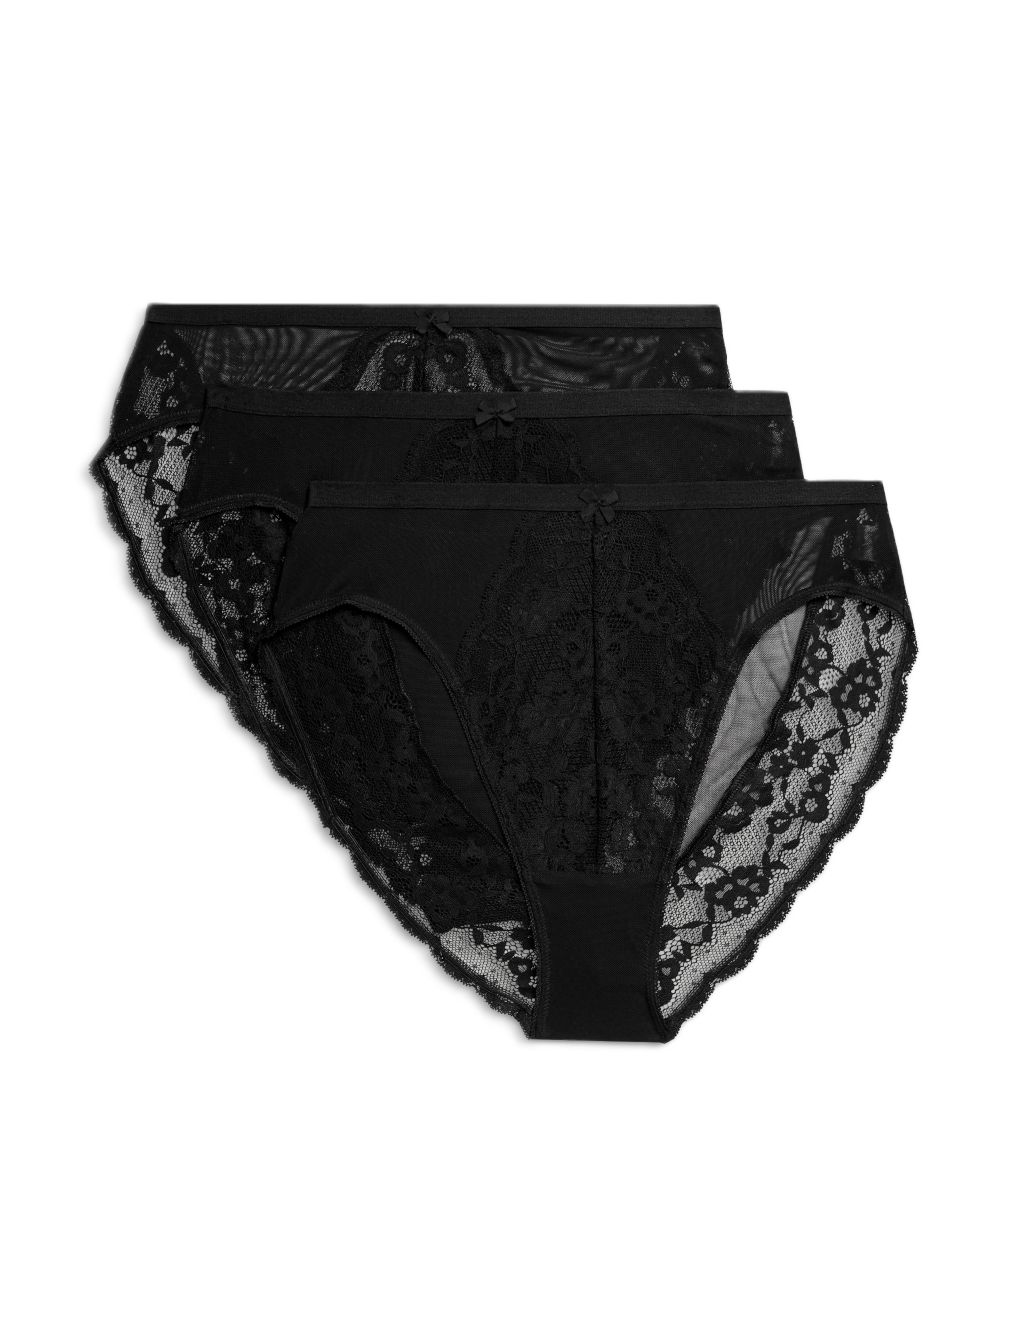 3pk Lace High Waisted High Leg Knickers, M&S Collection